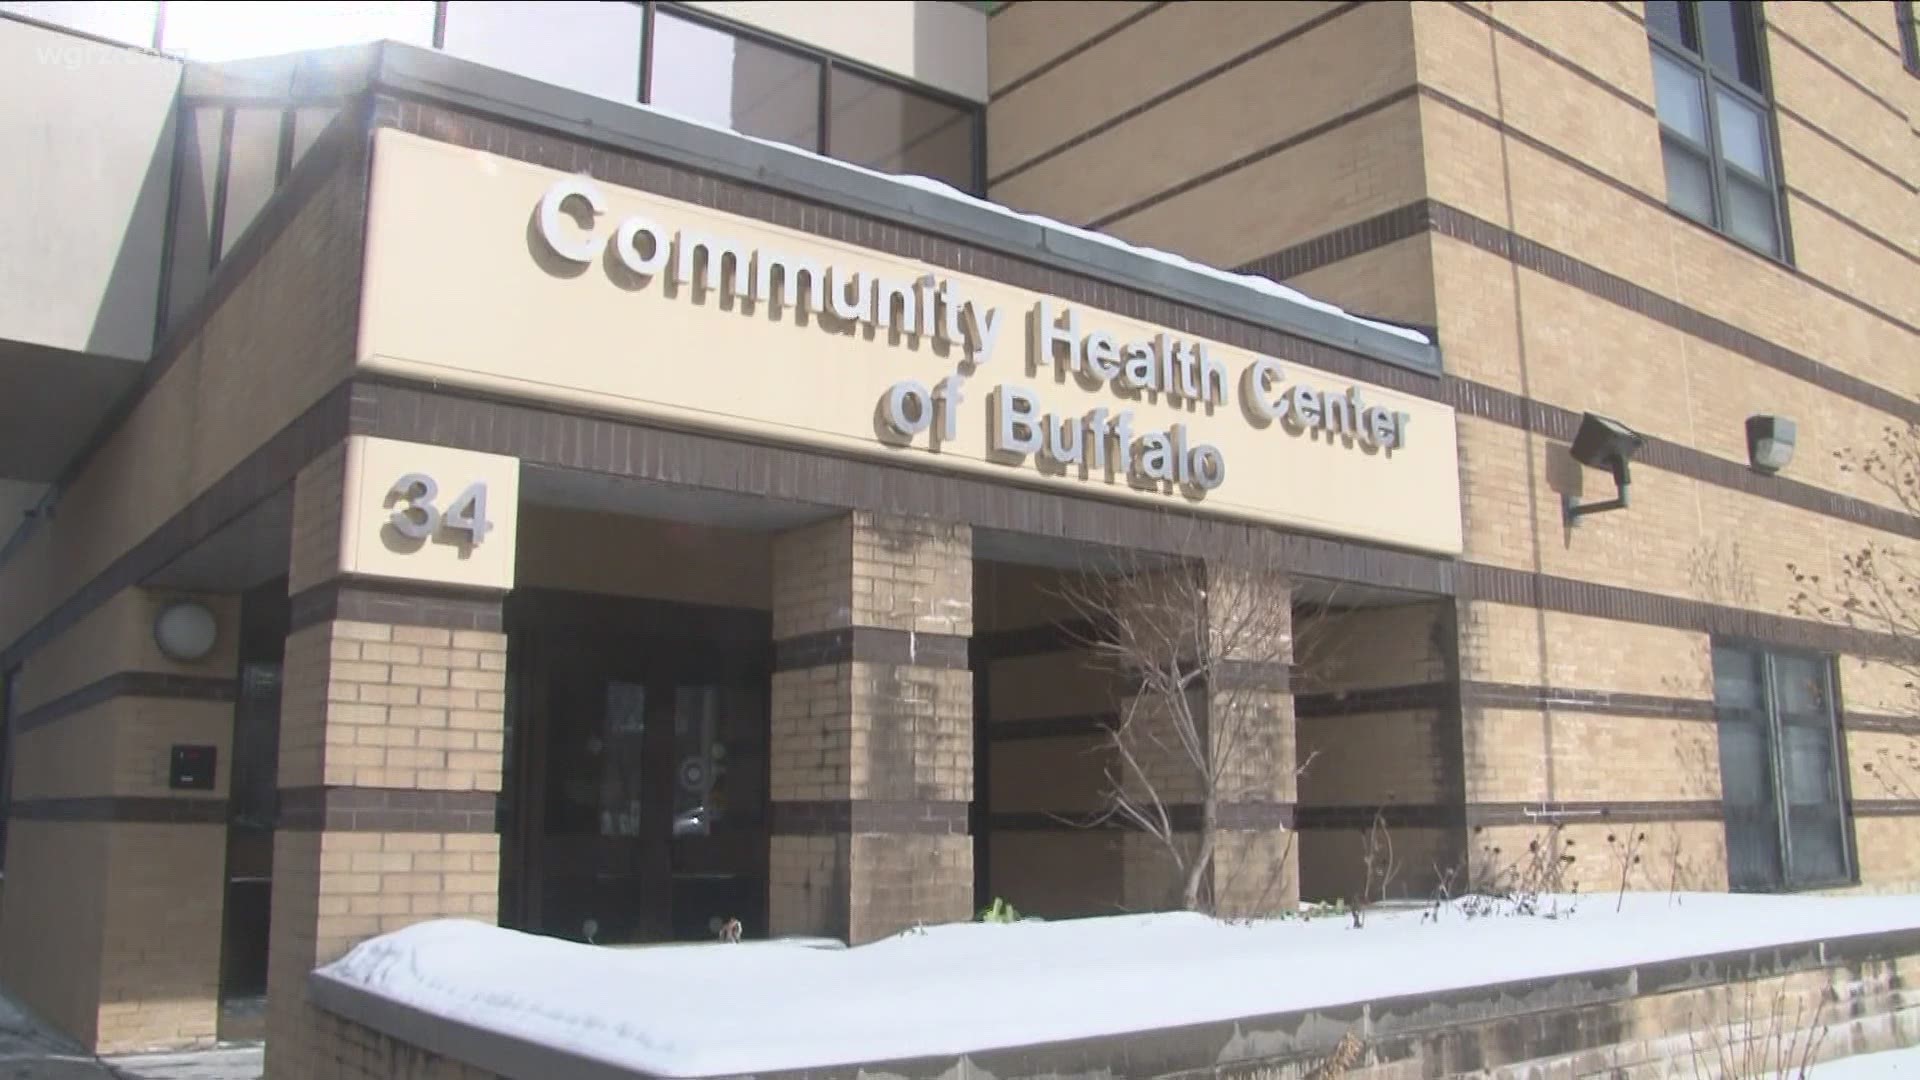 It's too early to say whether Community Health Center of Buffalo will get doses of vaccine. But, the health care provider is lobbying to get vaccine.